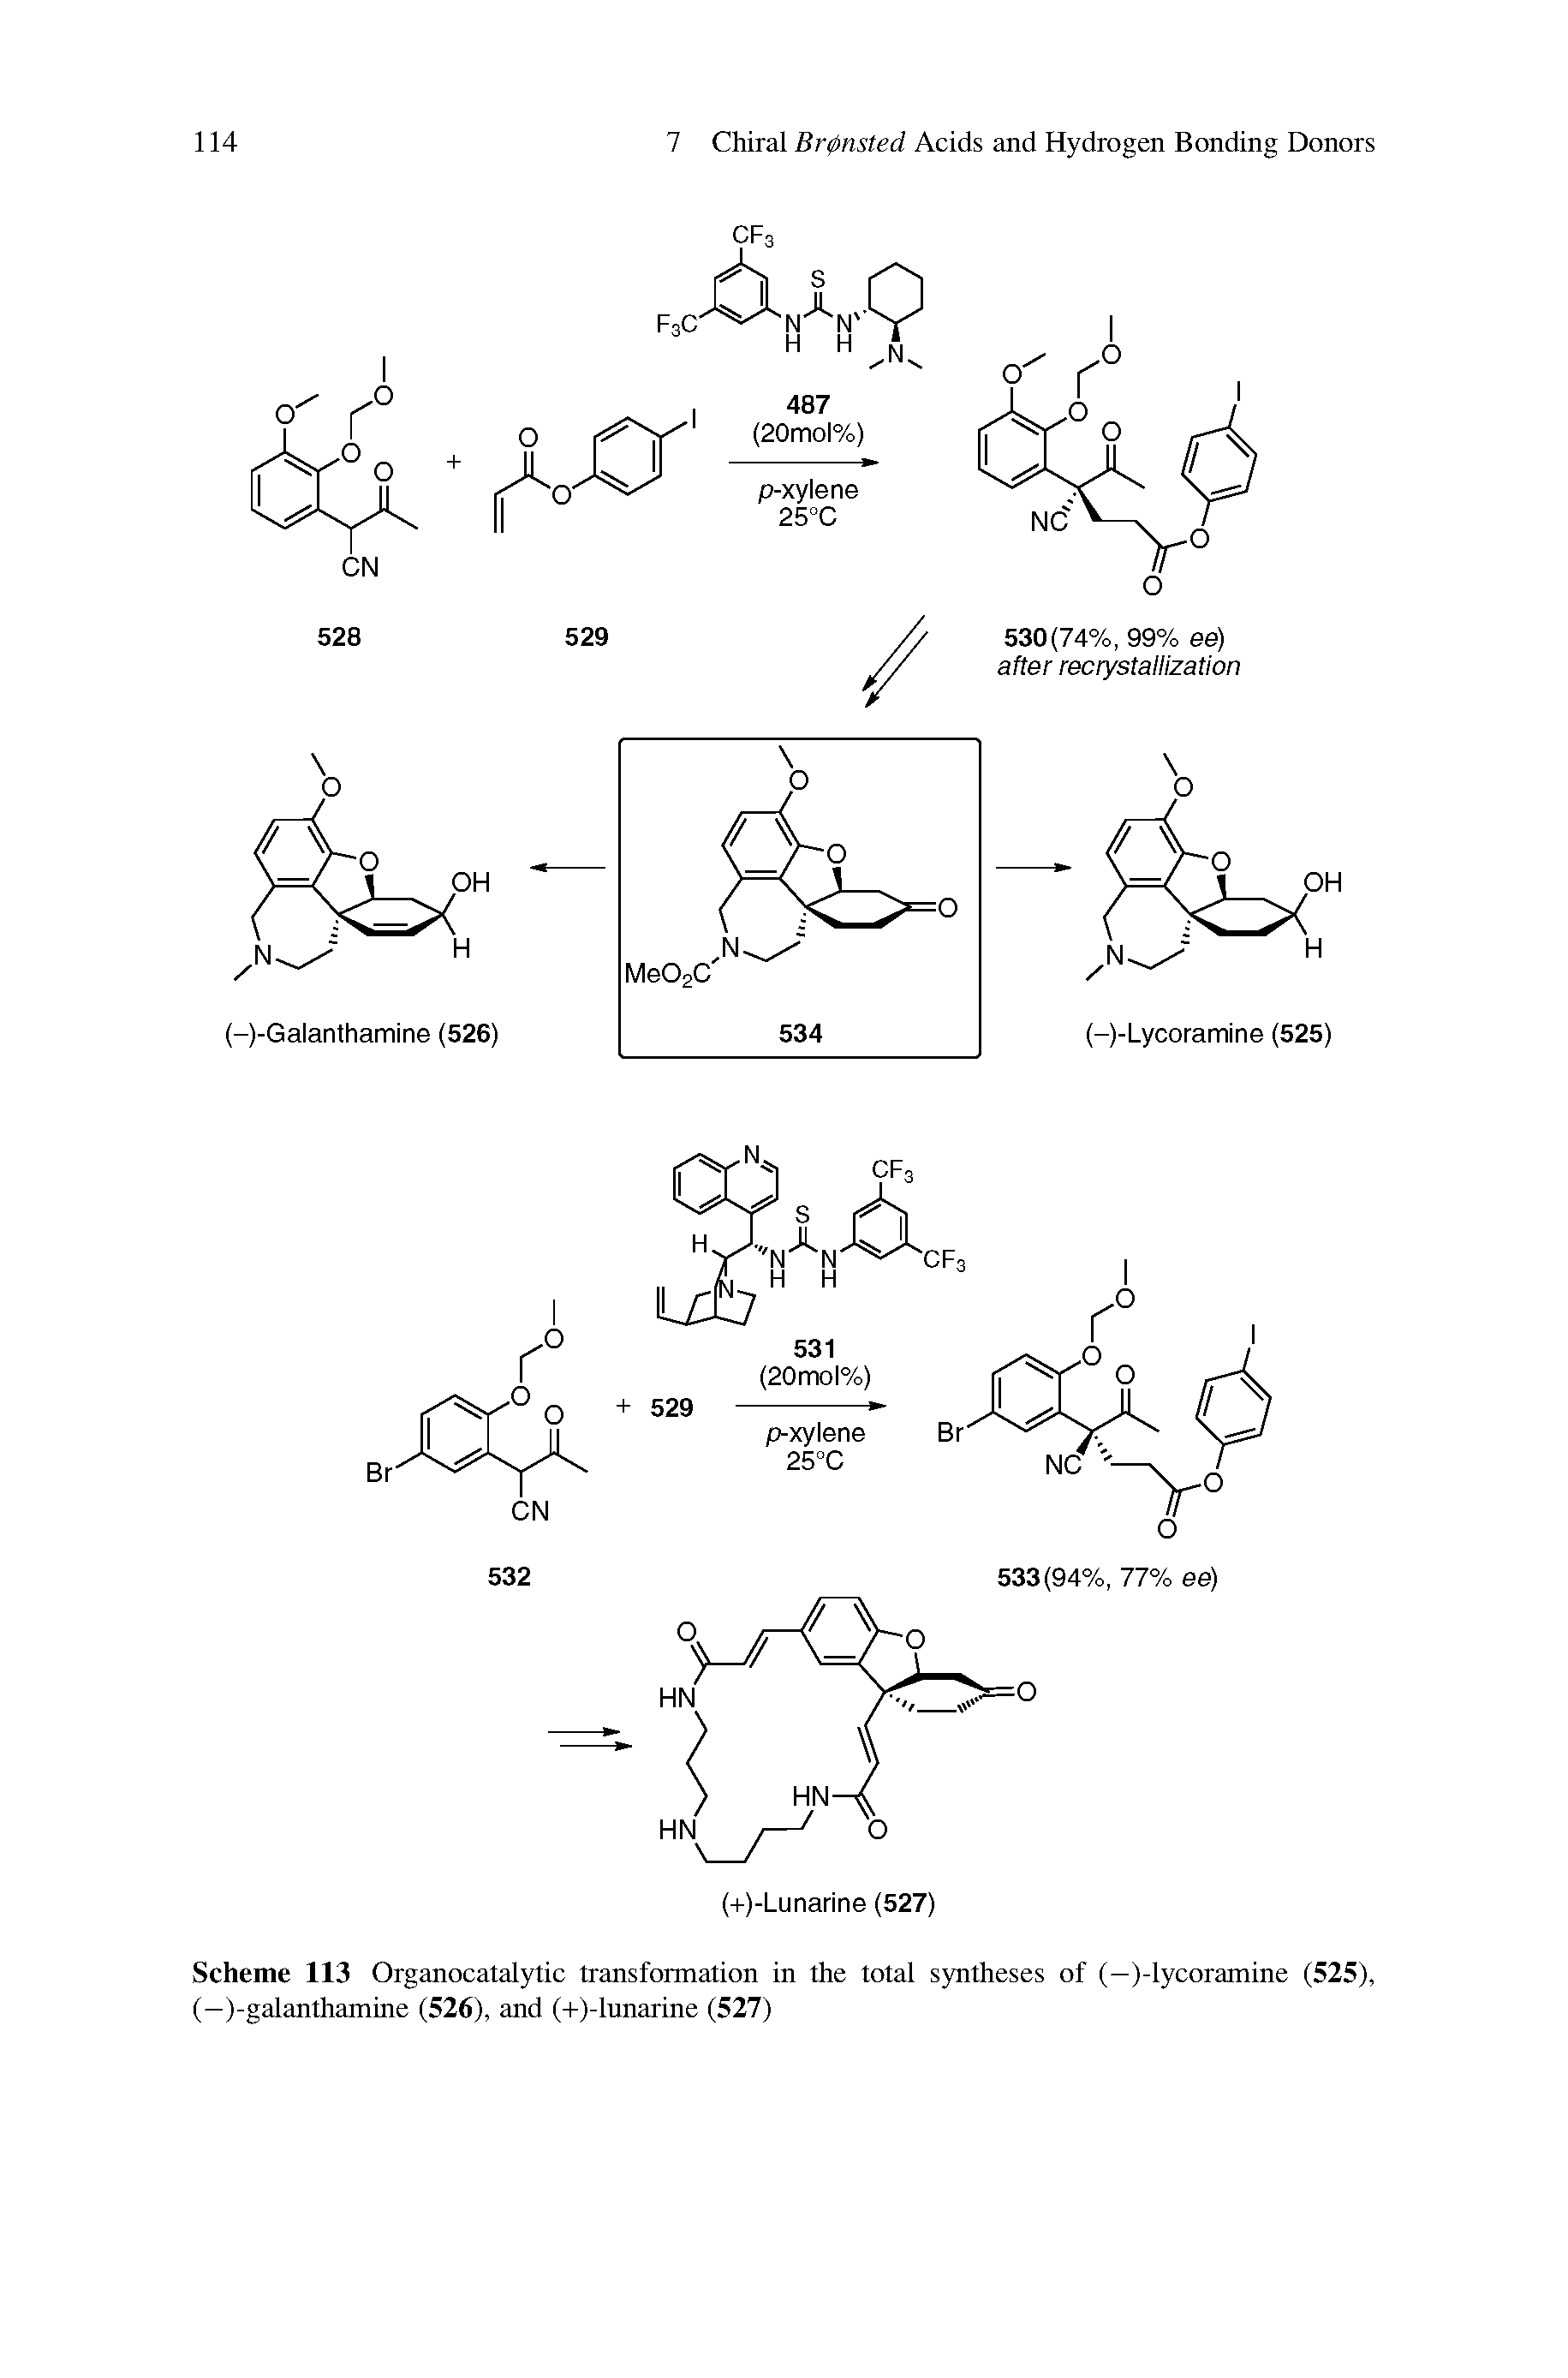 Scheme 113 Organocatalytic transformation in the total syntheses of (—)-lycoramine (525), (—)-galanthamine (526), and (+)-lunarine (527)...